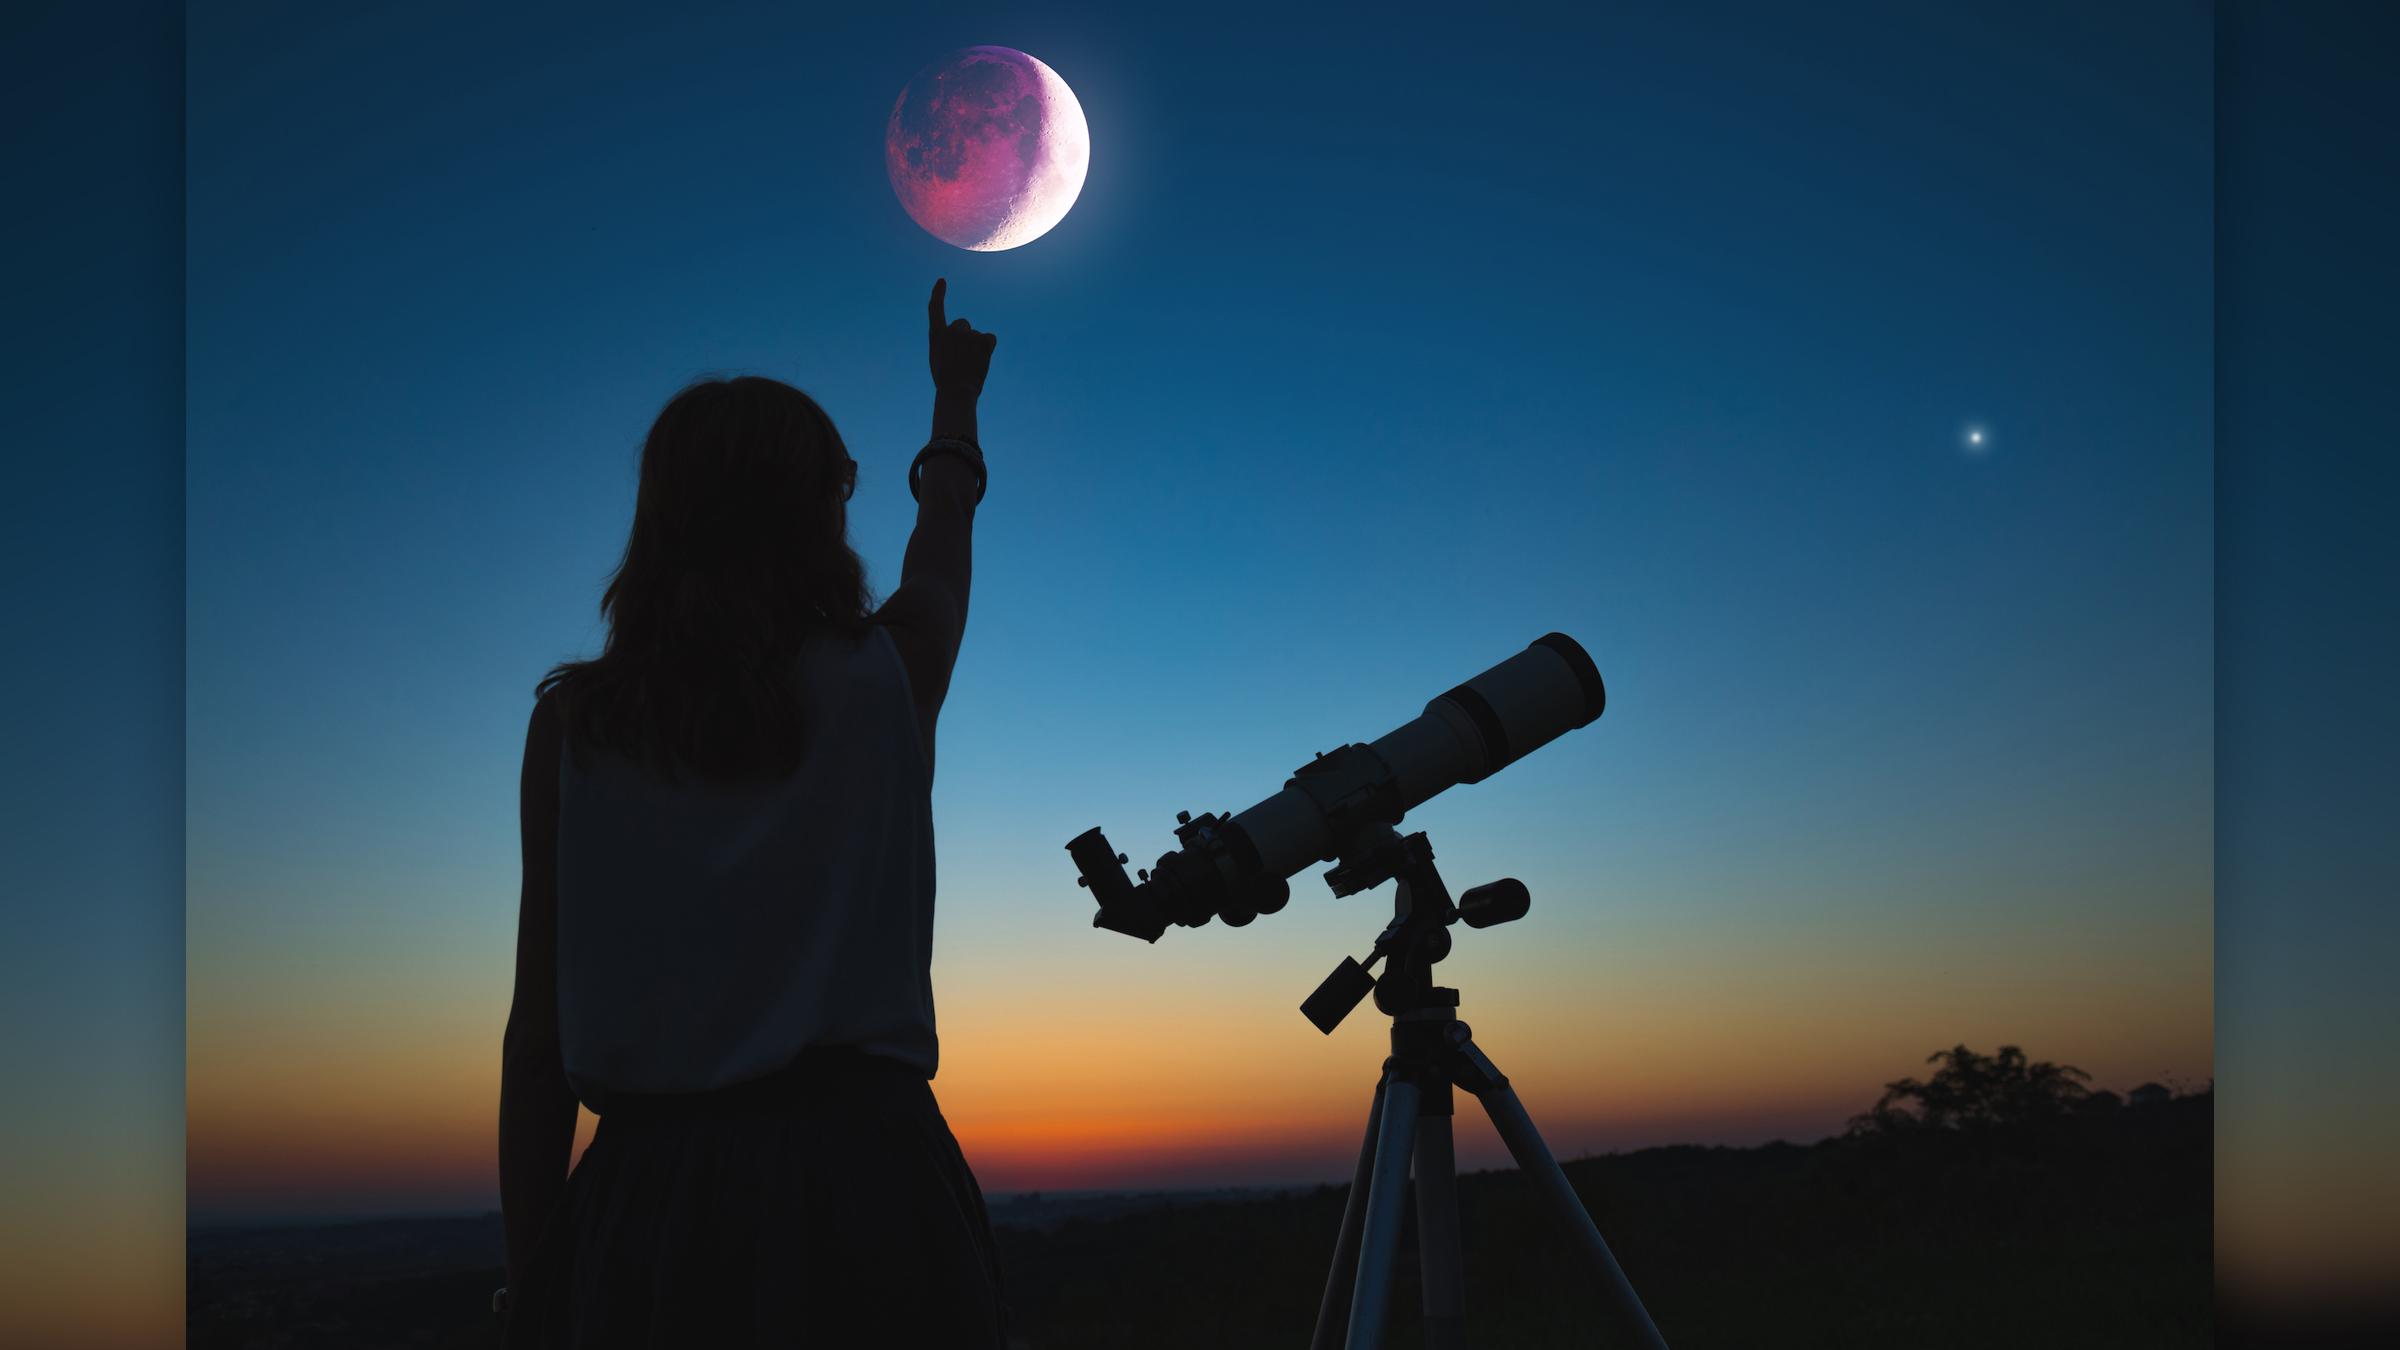 A girl with a telescope is watching a lunar eclipse at dawn.